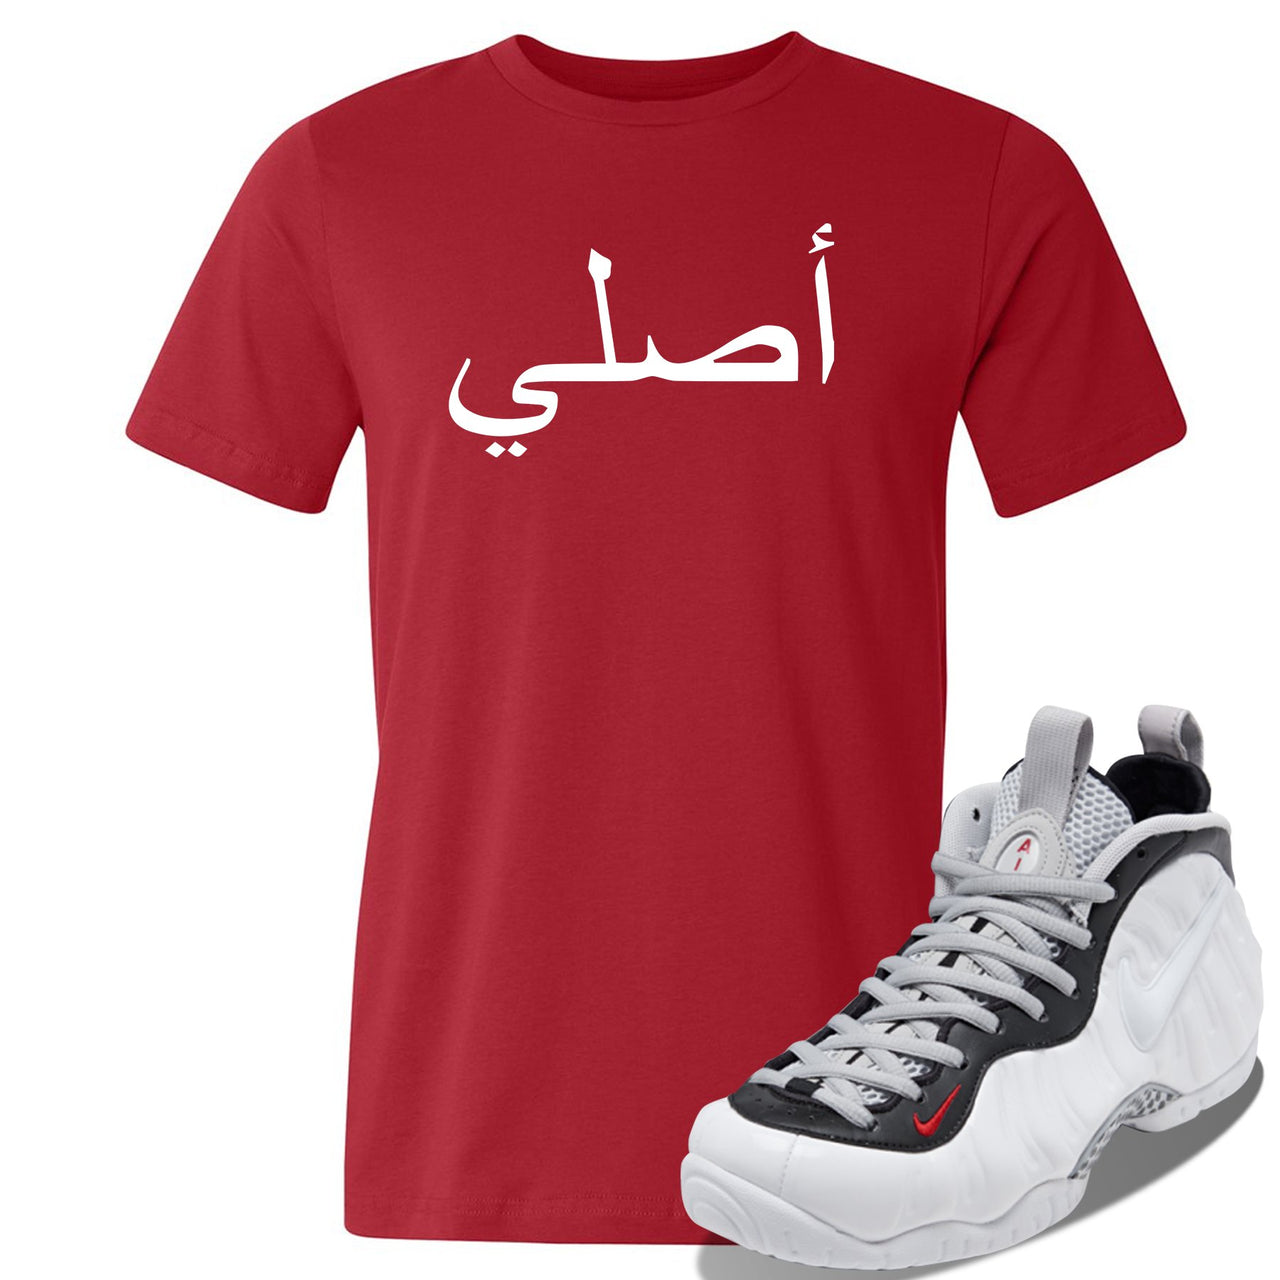 Foamposite Pro White Black University Red Sneaker Red T Shirt | Tees to match Nike Air Foamposite Pro White Black University Red Shoes | Original Arabic